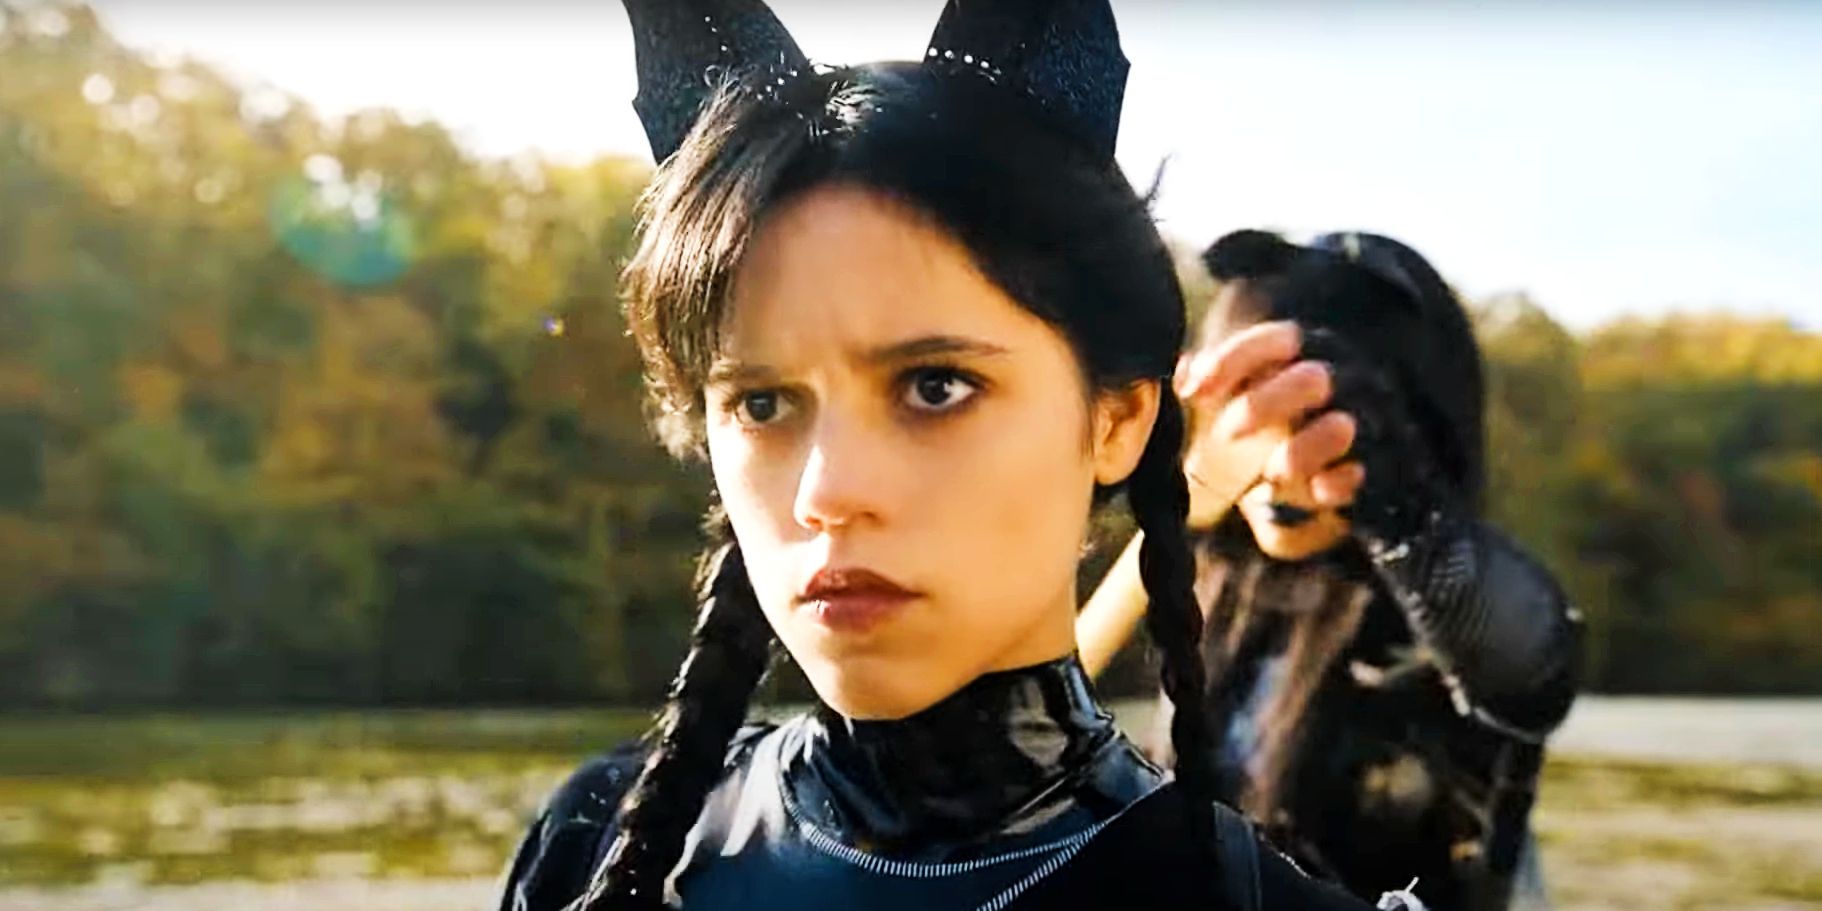 Jenna Ortega as Wednesday Addams wearing catsuit and rowing in Wednesday